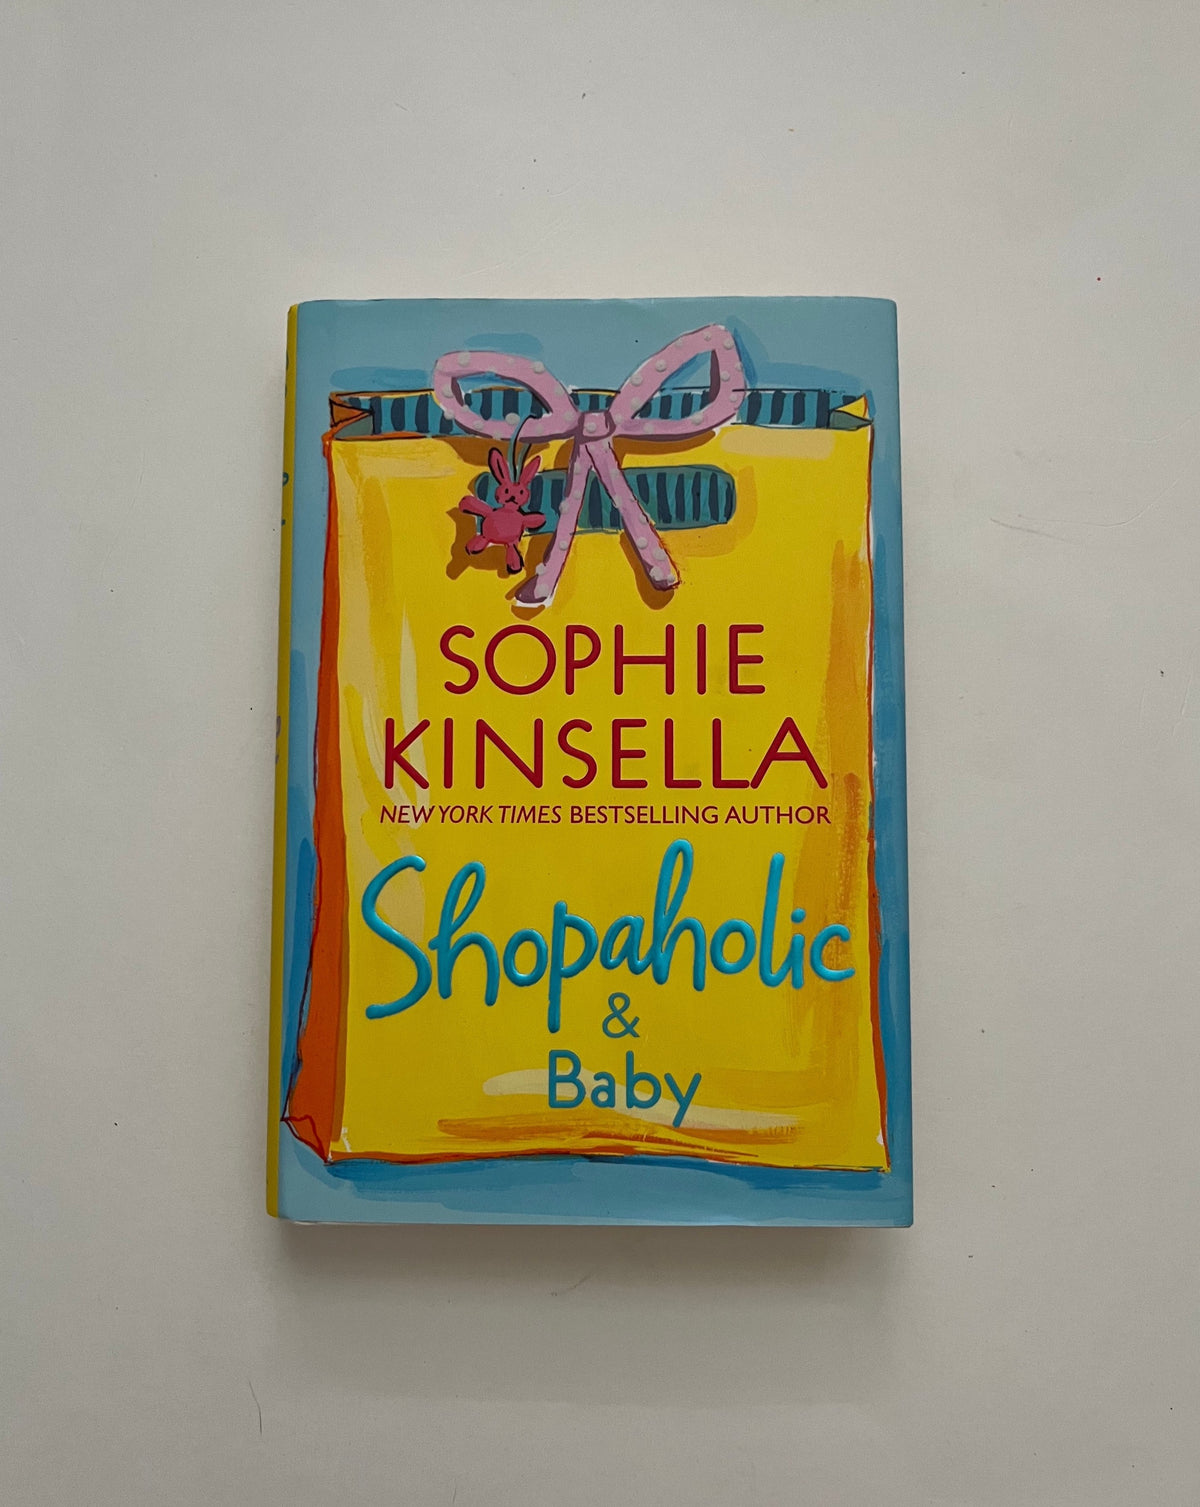 Shopaholic &amp; Baby by Sophie Kinsella